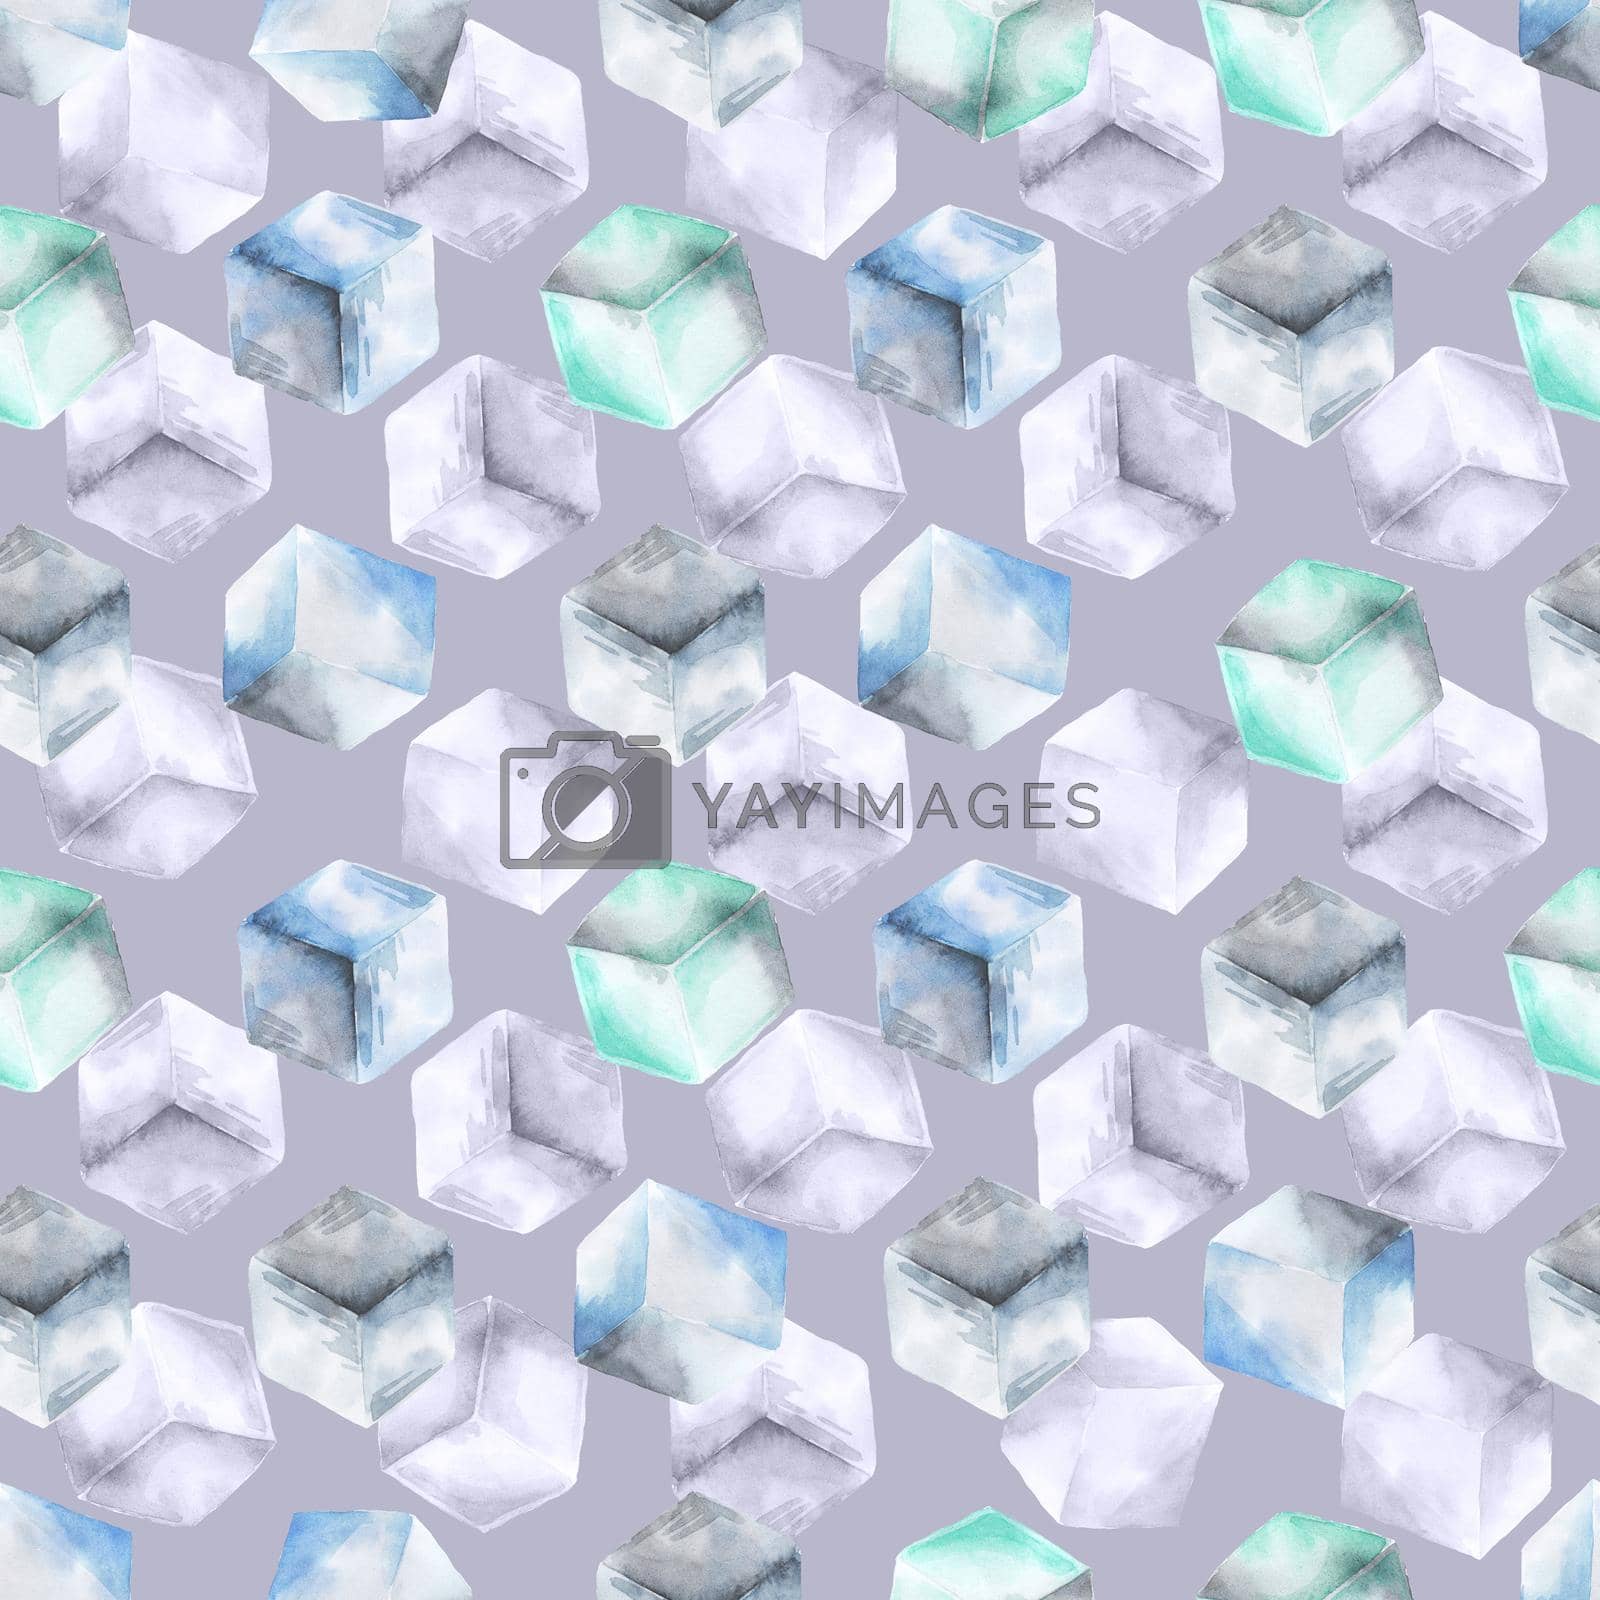 Royalty free image of Ice cube seamless pattern on violet background. Hand drawn watercolor illustration by fireFLYart